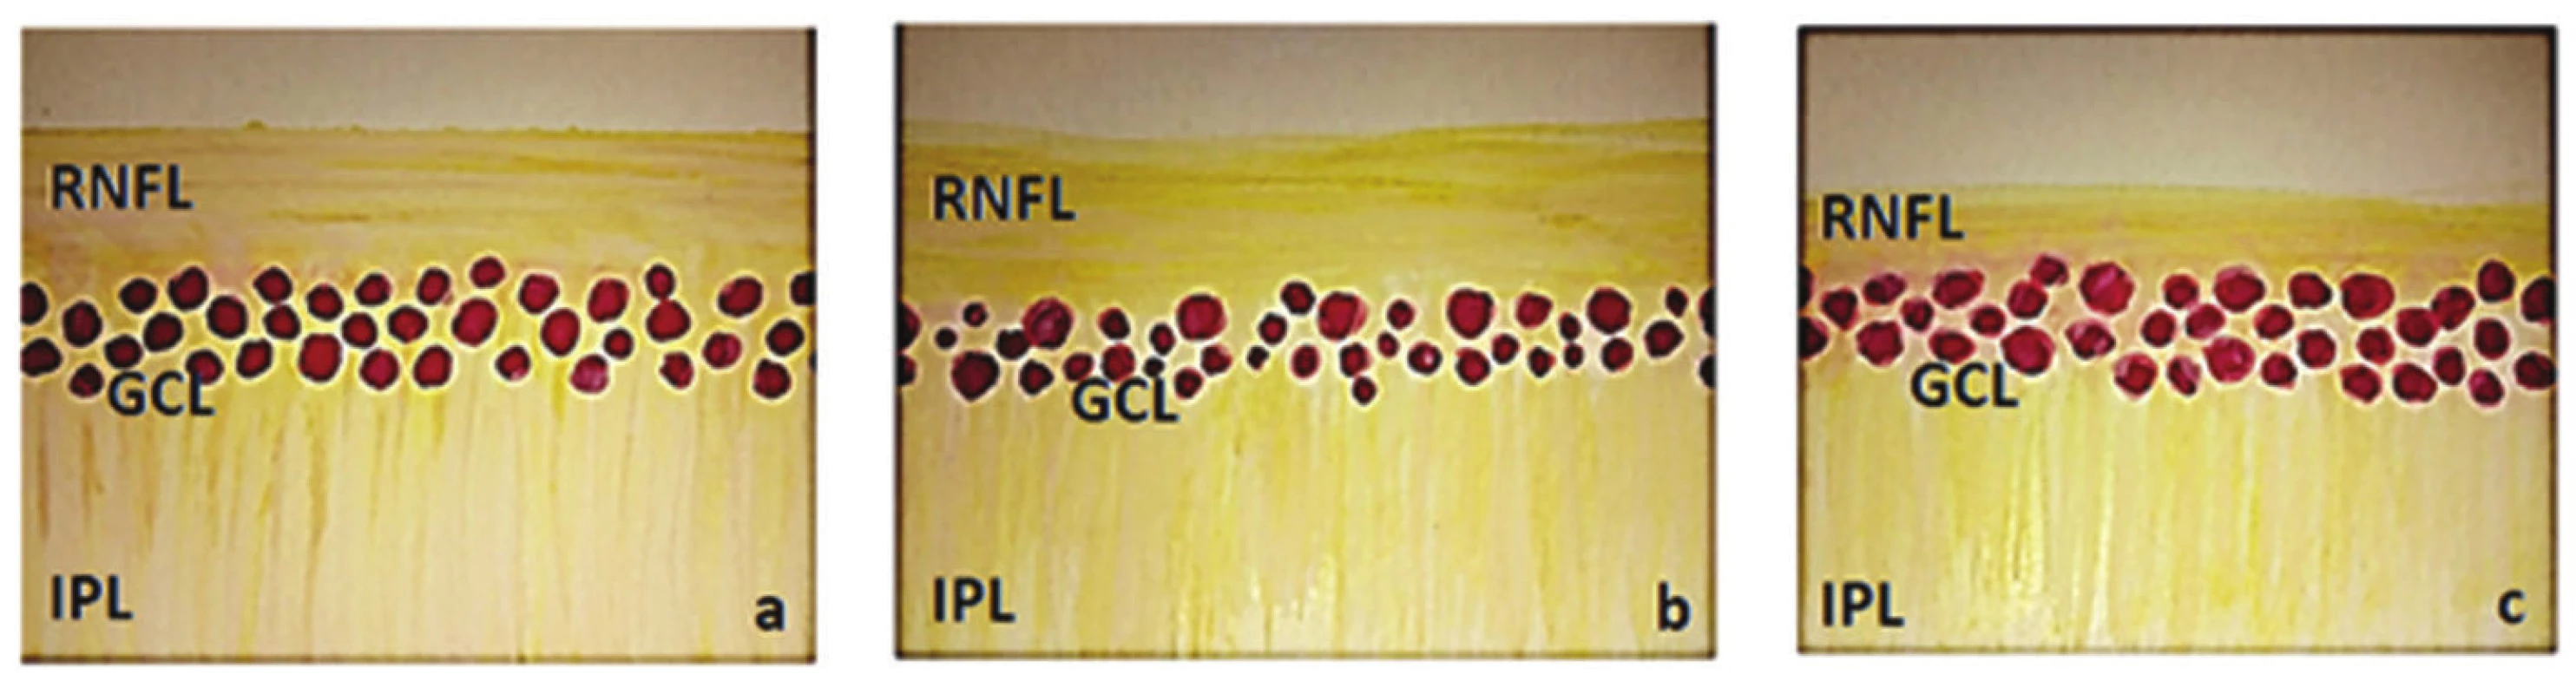 Schematic illustration of inner layers of retina (RNFL – retinal nerve fibre layer, GCL – ganglion cell layer, IPL – inner plexiform layer) a) normal finding, b) finding in HTG – reduction of GCL and slightly also RNFL, c) finding in NTG – reduction of RNFL and slightly also GCL